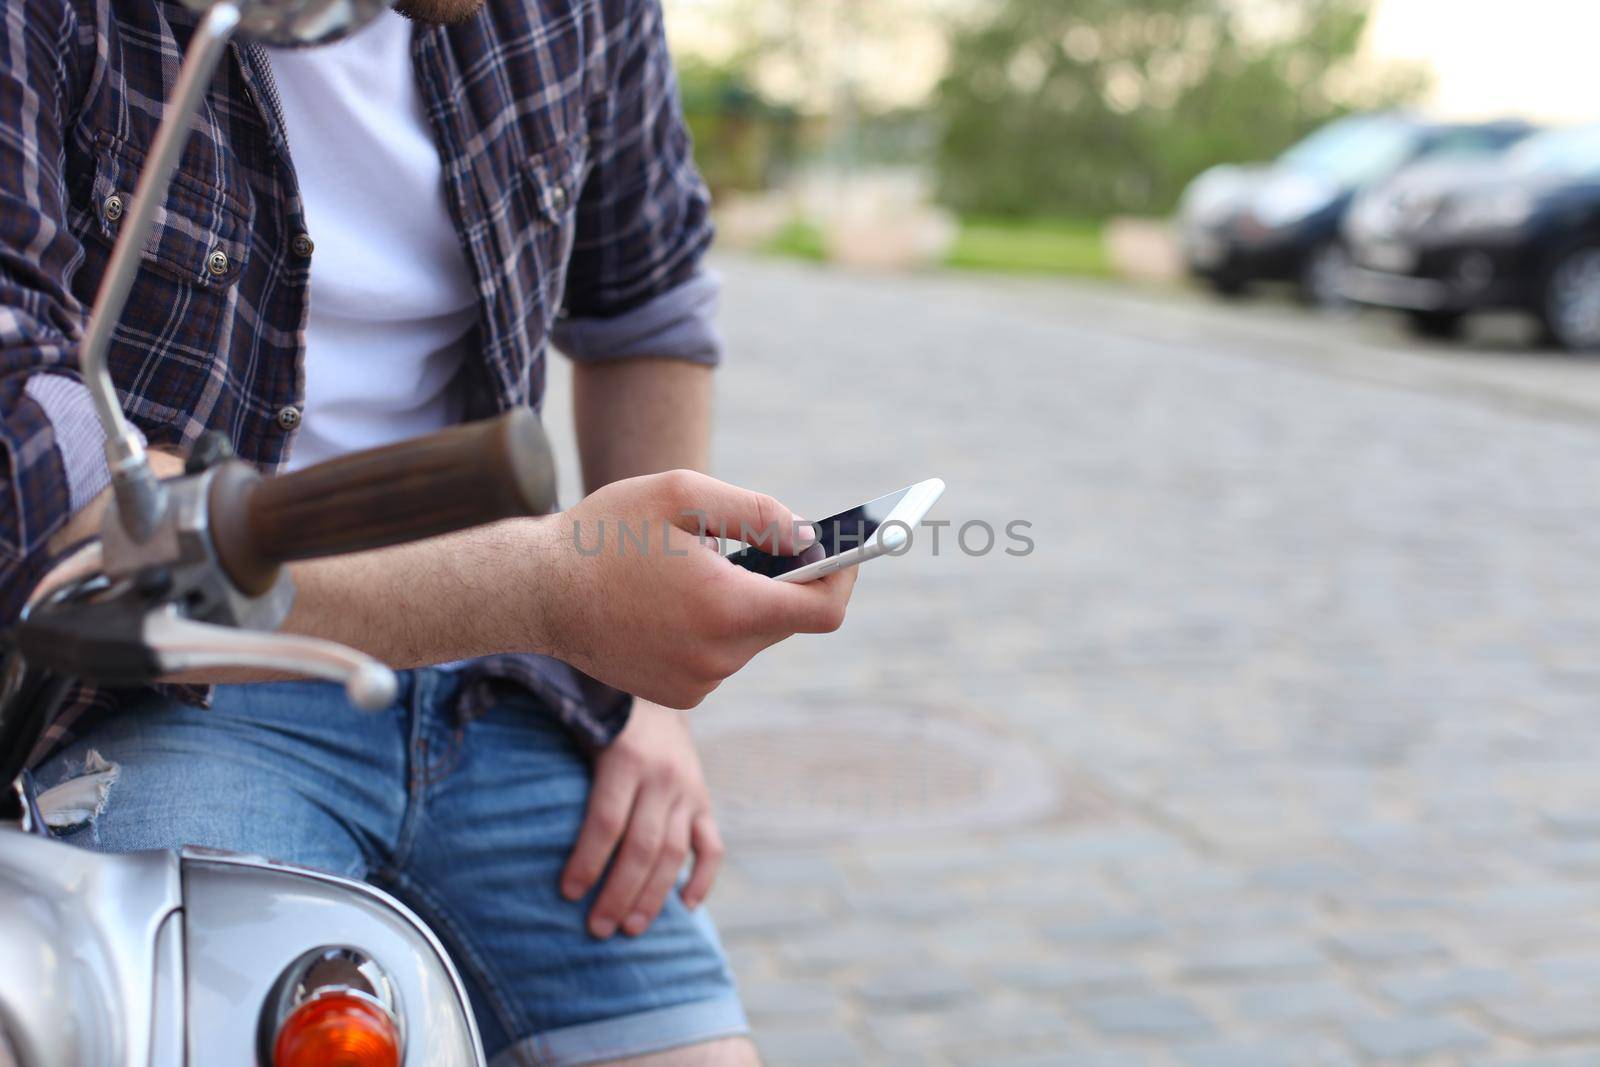 Young man sitting on scooter and using smart phone by tsyhun